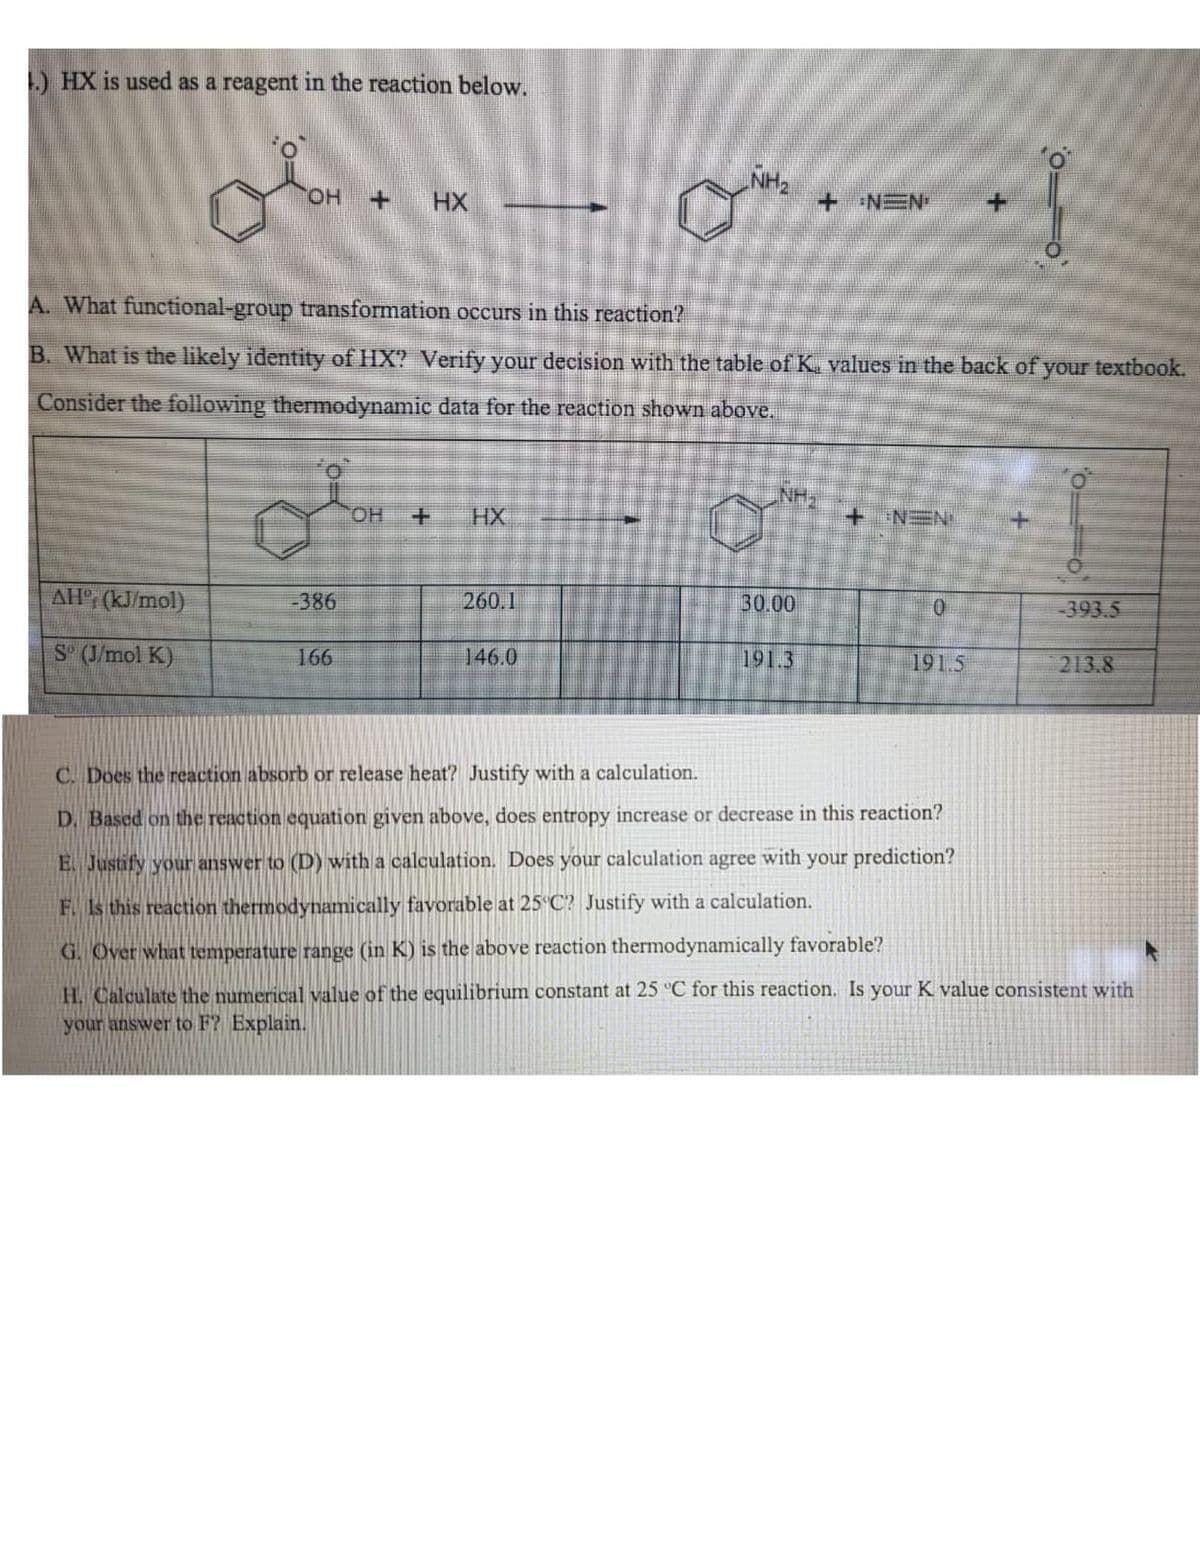 ) HX is used as a reagent in the reaction below.
NH2
Он +
HX
+ NEN
A. What functional-group transformation occurs in this reaction?
B. What is the likely identity of HX? Verify your decision with the table of K. values in the back of your textbook.
Consider the following thermodynamic data for the reaction shown above.
HO.
HX
+ NEN
AH (kJ/mol)
-386
260.1
30.00
393.5
S (J/mol K)
166
146.0
191.3
191.5
213.8
C. Does the reaction absorb or release heat? Justify with a calculation.
D. Based on the reaction equation given above, does entropy increase or decrease in this reaction?
E. Justify your answer to (D) with a calculation. Does your calculation agree with your prediction?
F. Is this reaction thermodynamically favorable at 25 C? Justify with a calculation.
G. Over what temperature range (in K) is the above reaction thermodynamically favorable?
H. Calculate the numerical value of the equilibrium constant at 25 "C for this reaction. Is your K value consistent with
your answer to F? Explain.
